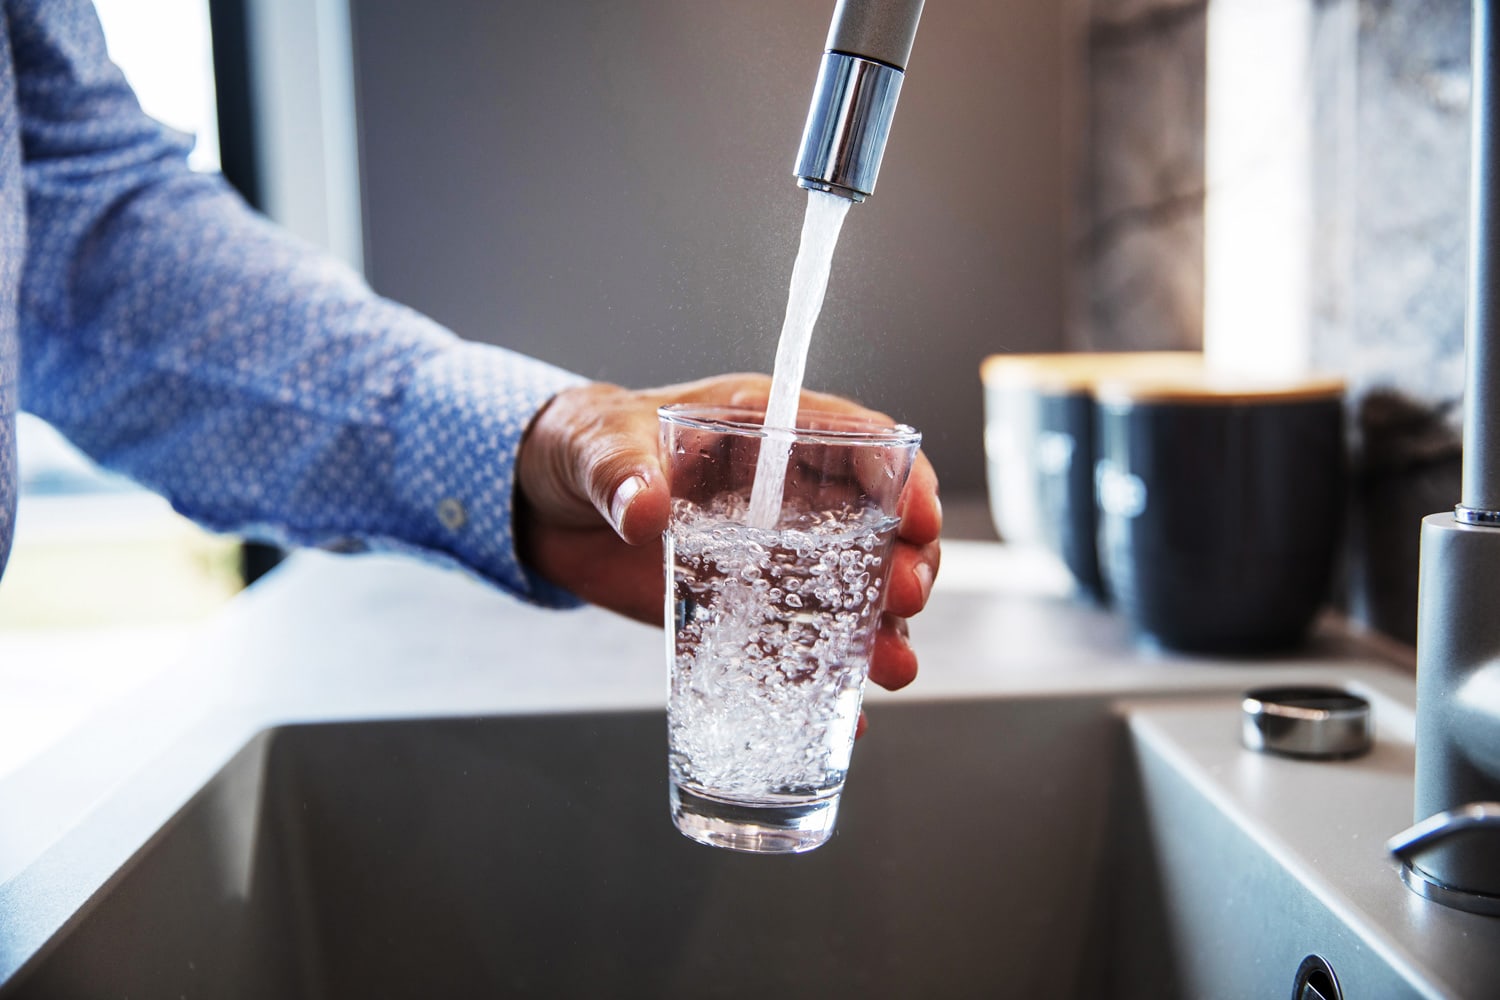 Mature male hand pouring a glass of water from tap in the kitchen sink